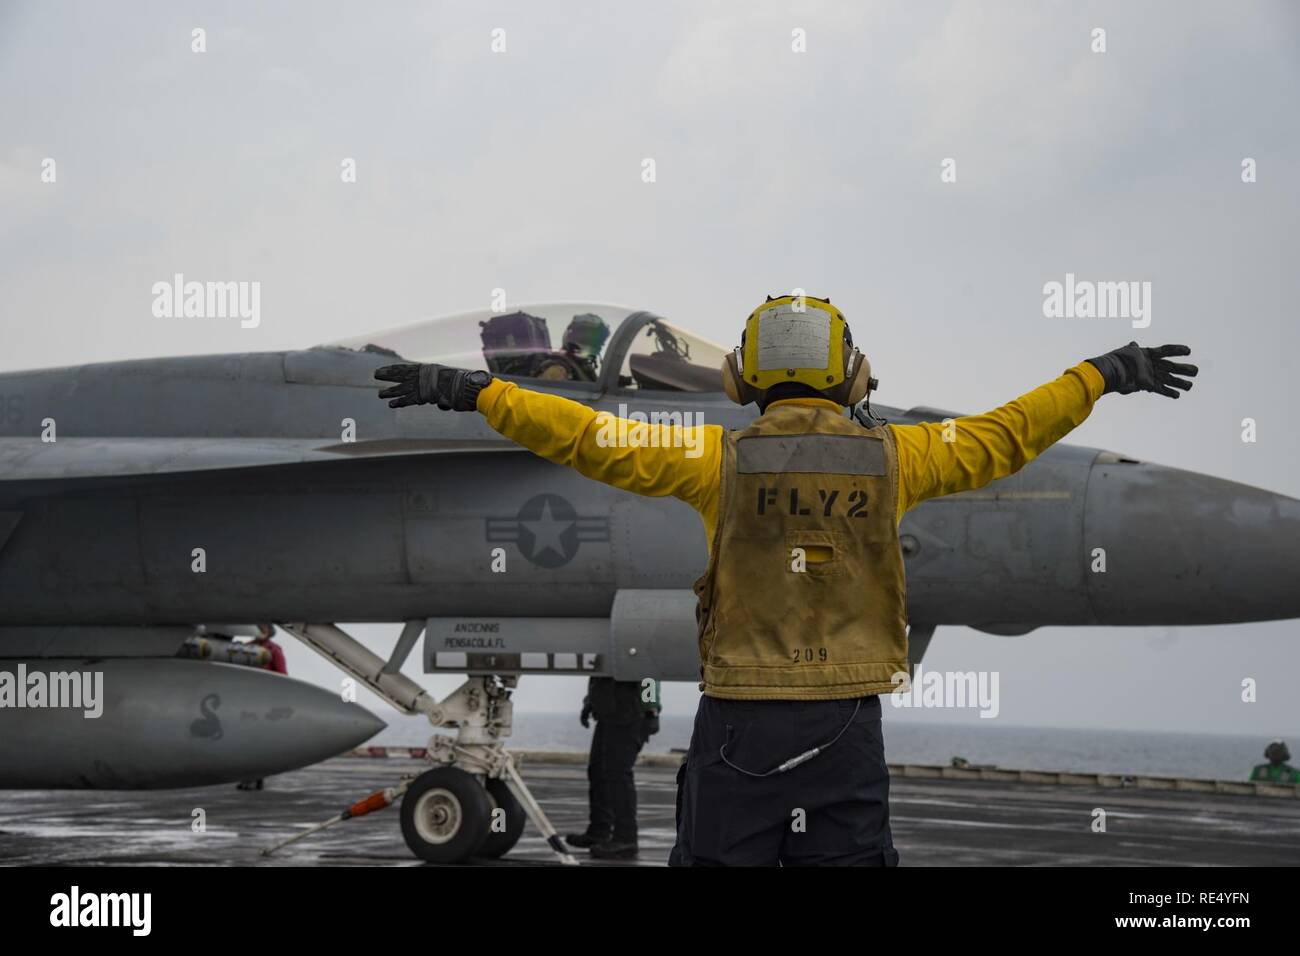 ARABIAN GULF (Nov. 24, 2016) Petty Officer 3rd Class Kenneth Tenoso signals to Capt. Jeffrey Anderson, Commander, Carrier Air Wing Three inside the cockpit of an F/A-18E Super Hornet assigned to the Sidewinders of Strike Fighter Squadron (VFA) 86 on the flight deck of the aircraft carrier USS Dwight D. Eisenhower (CVN 69) (Ike). Ike and its Carrier Strike Group are deployed in support of Operation Inherent Resolve, maritime security operations and theater security cooperation efforts in the U.S. 5th Fleet area of operations. Stock Photo